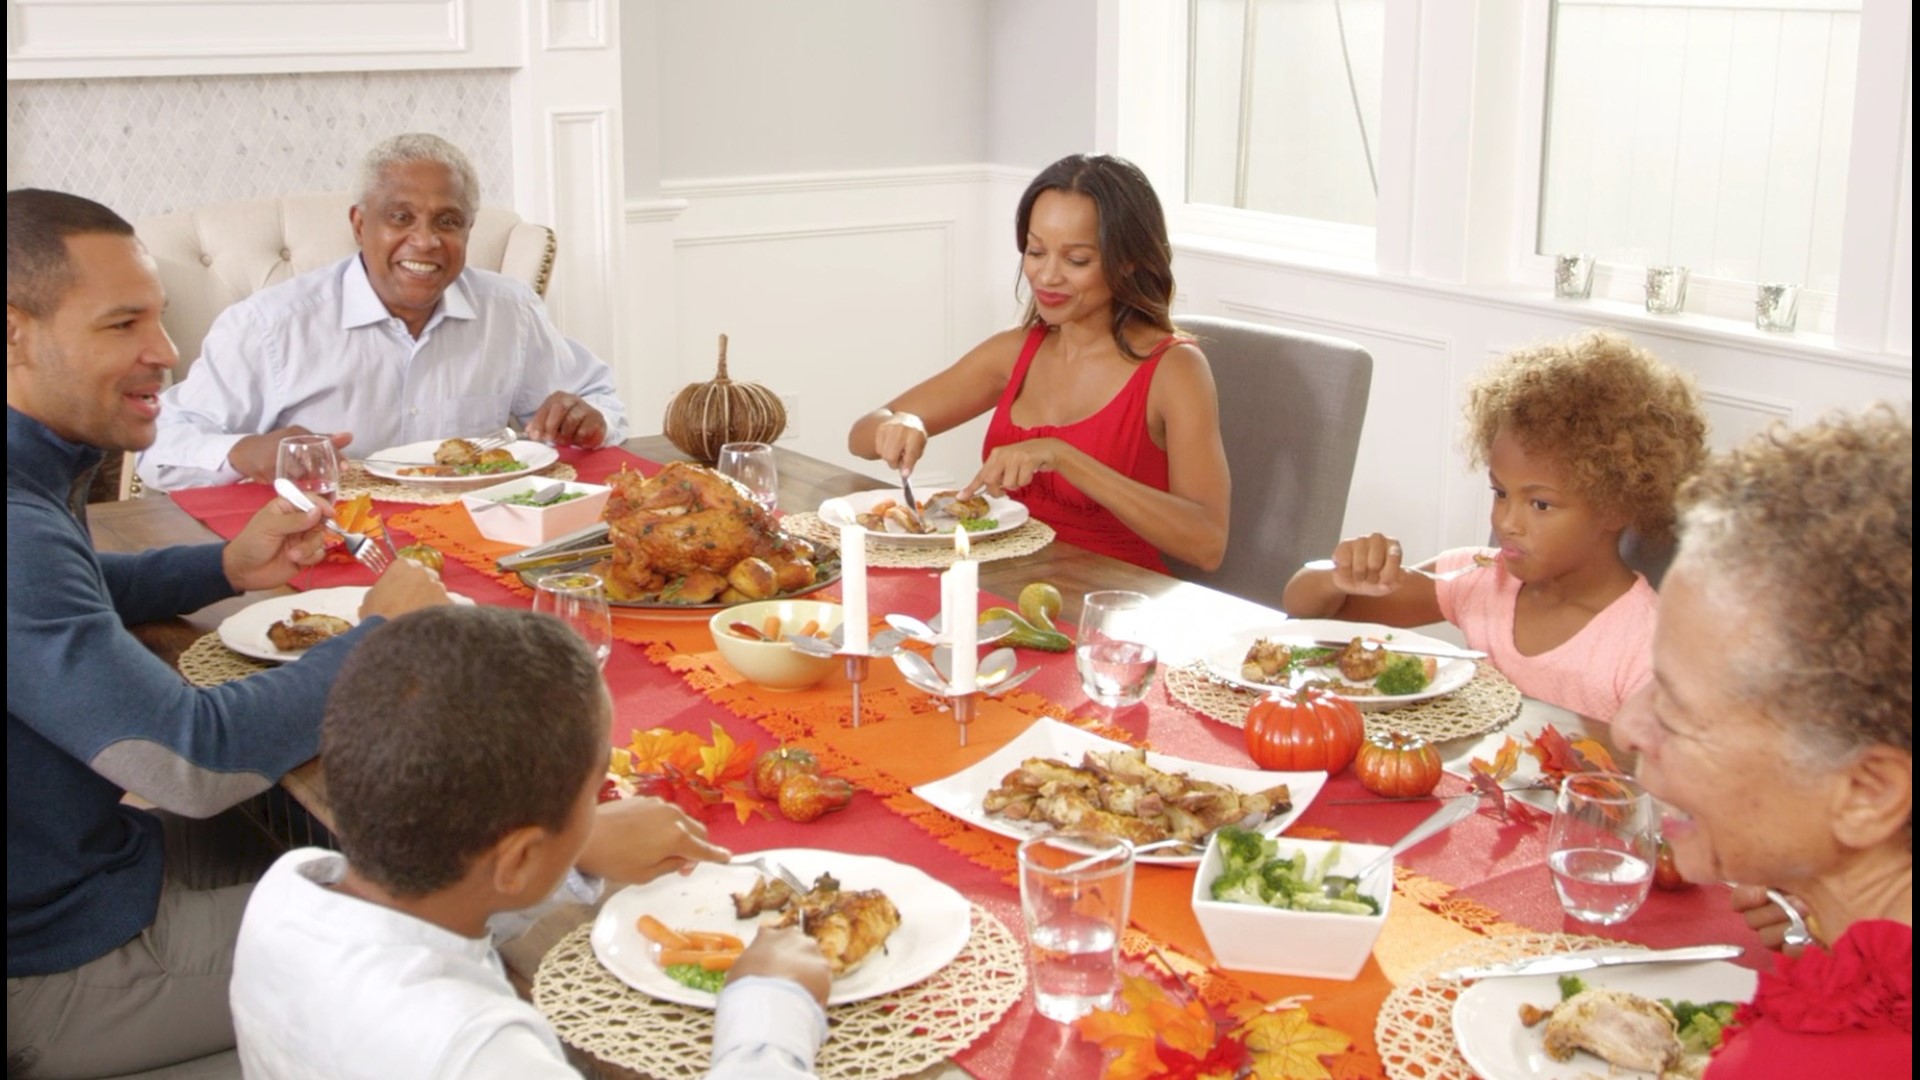 Thanksgiving in 2020 will probably look slightly different than your regular Thanksgiving, but you gotta see it as an opportunity for creating new traditions and saving money! Buzz60's Maria Mercedes Galuppo has the story.